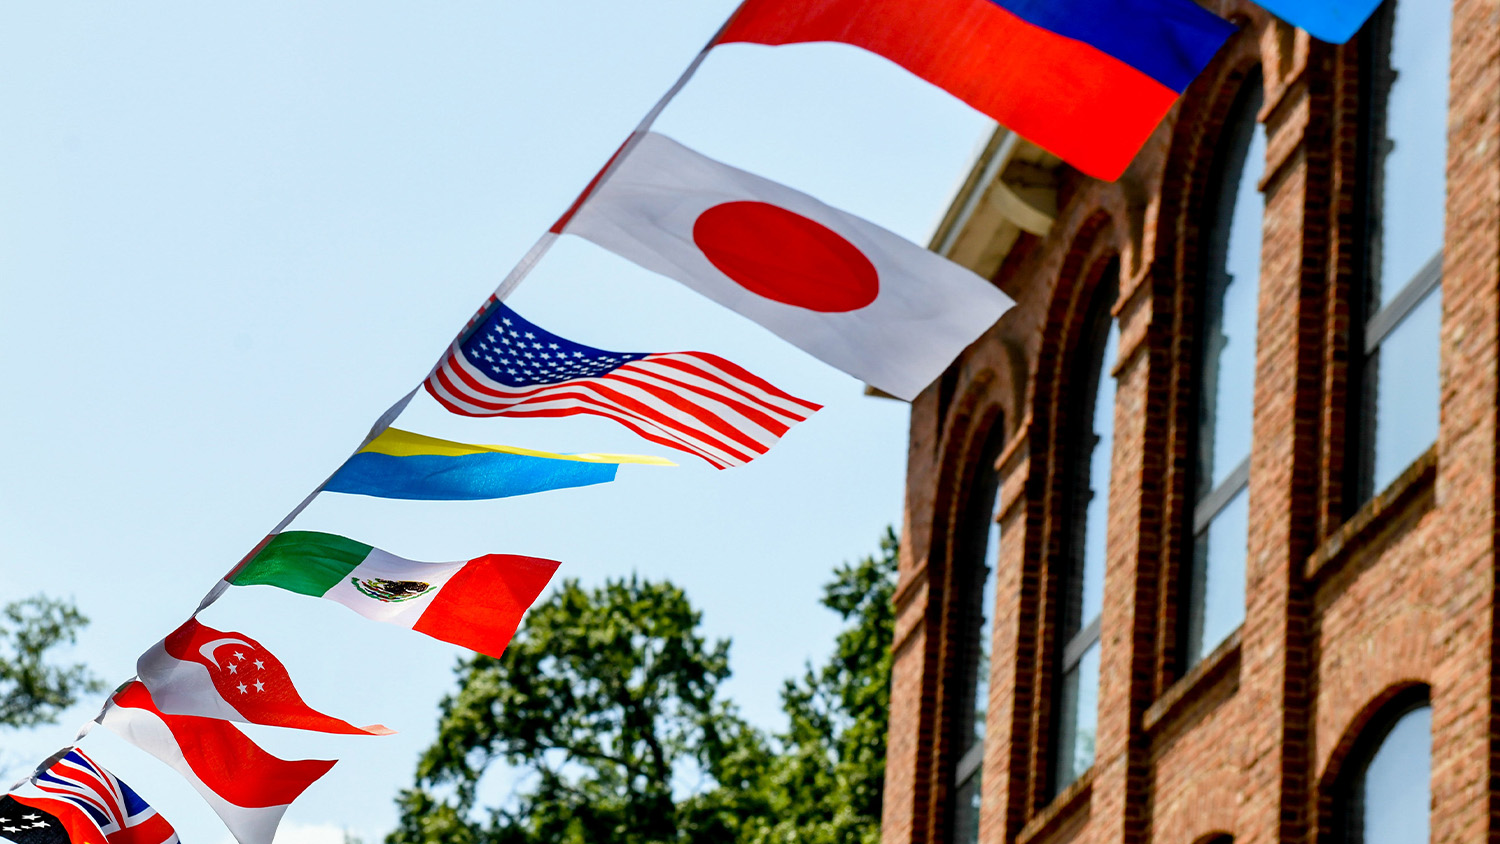 Flags from countries around the world dangle on a line in front of a brick building